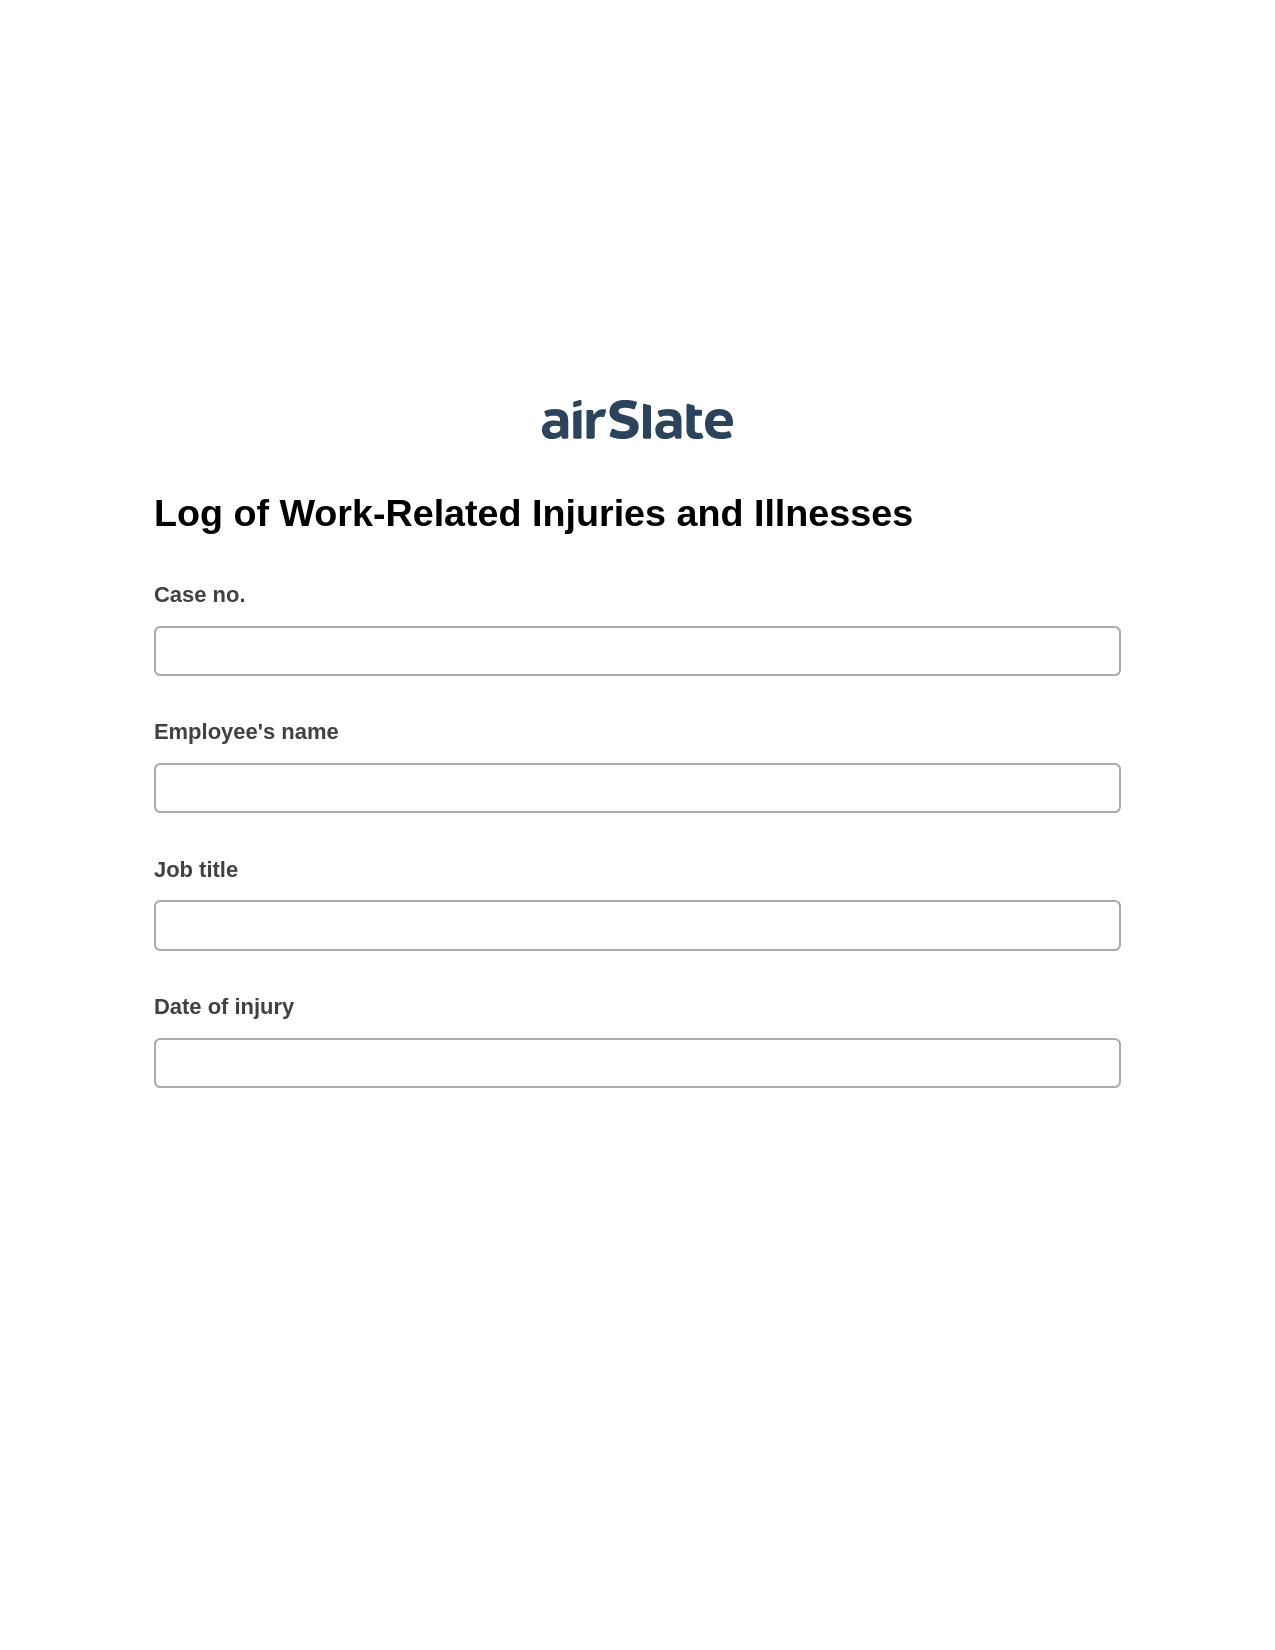 Multirole Log of Work-Related Injuries and Illnesses Pre-fill Slate from MS Dynamics 365 Records Bot, Lock the slate bot, Export to Formstack Documents Bot